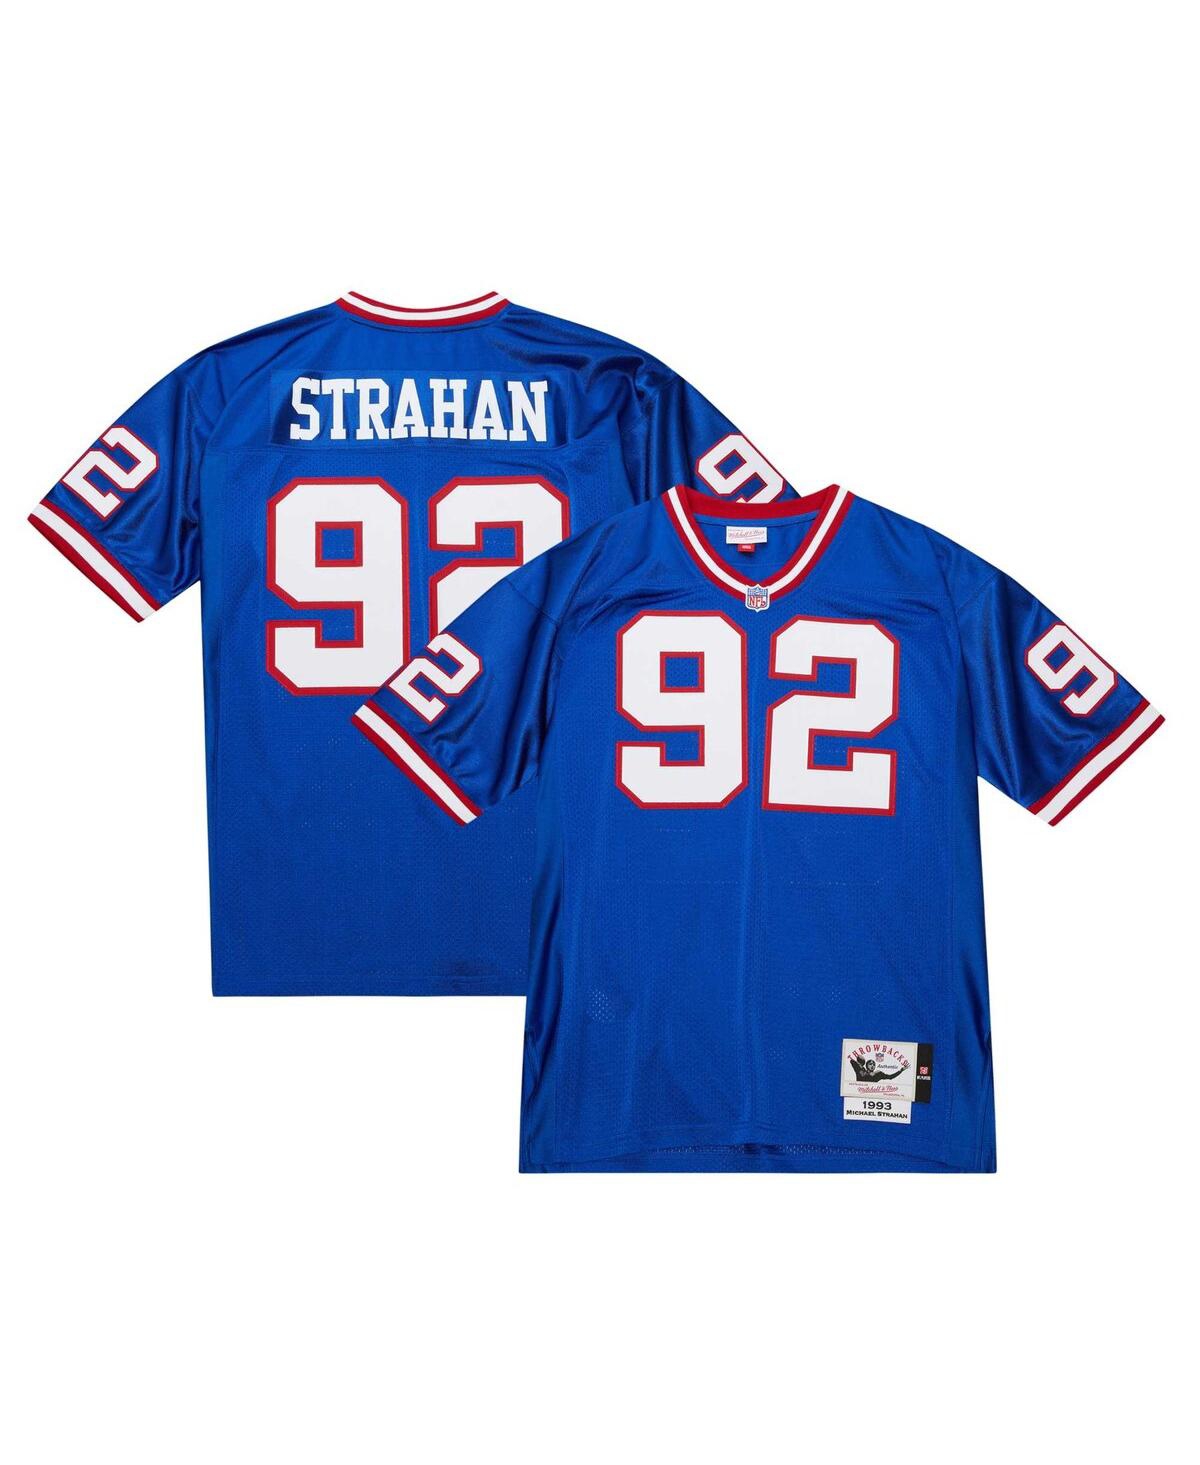 Men's Mitchell & Ness Michael Strahan Royal New York Giants 2004 Authentic Throwback Retired Player Jersey - Royal